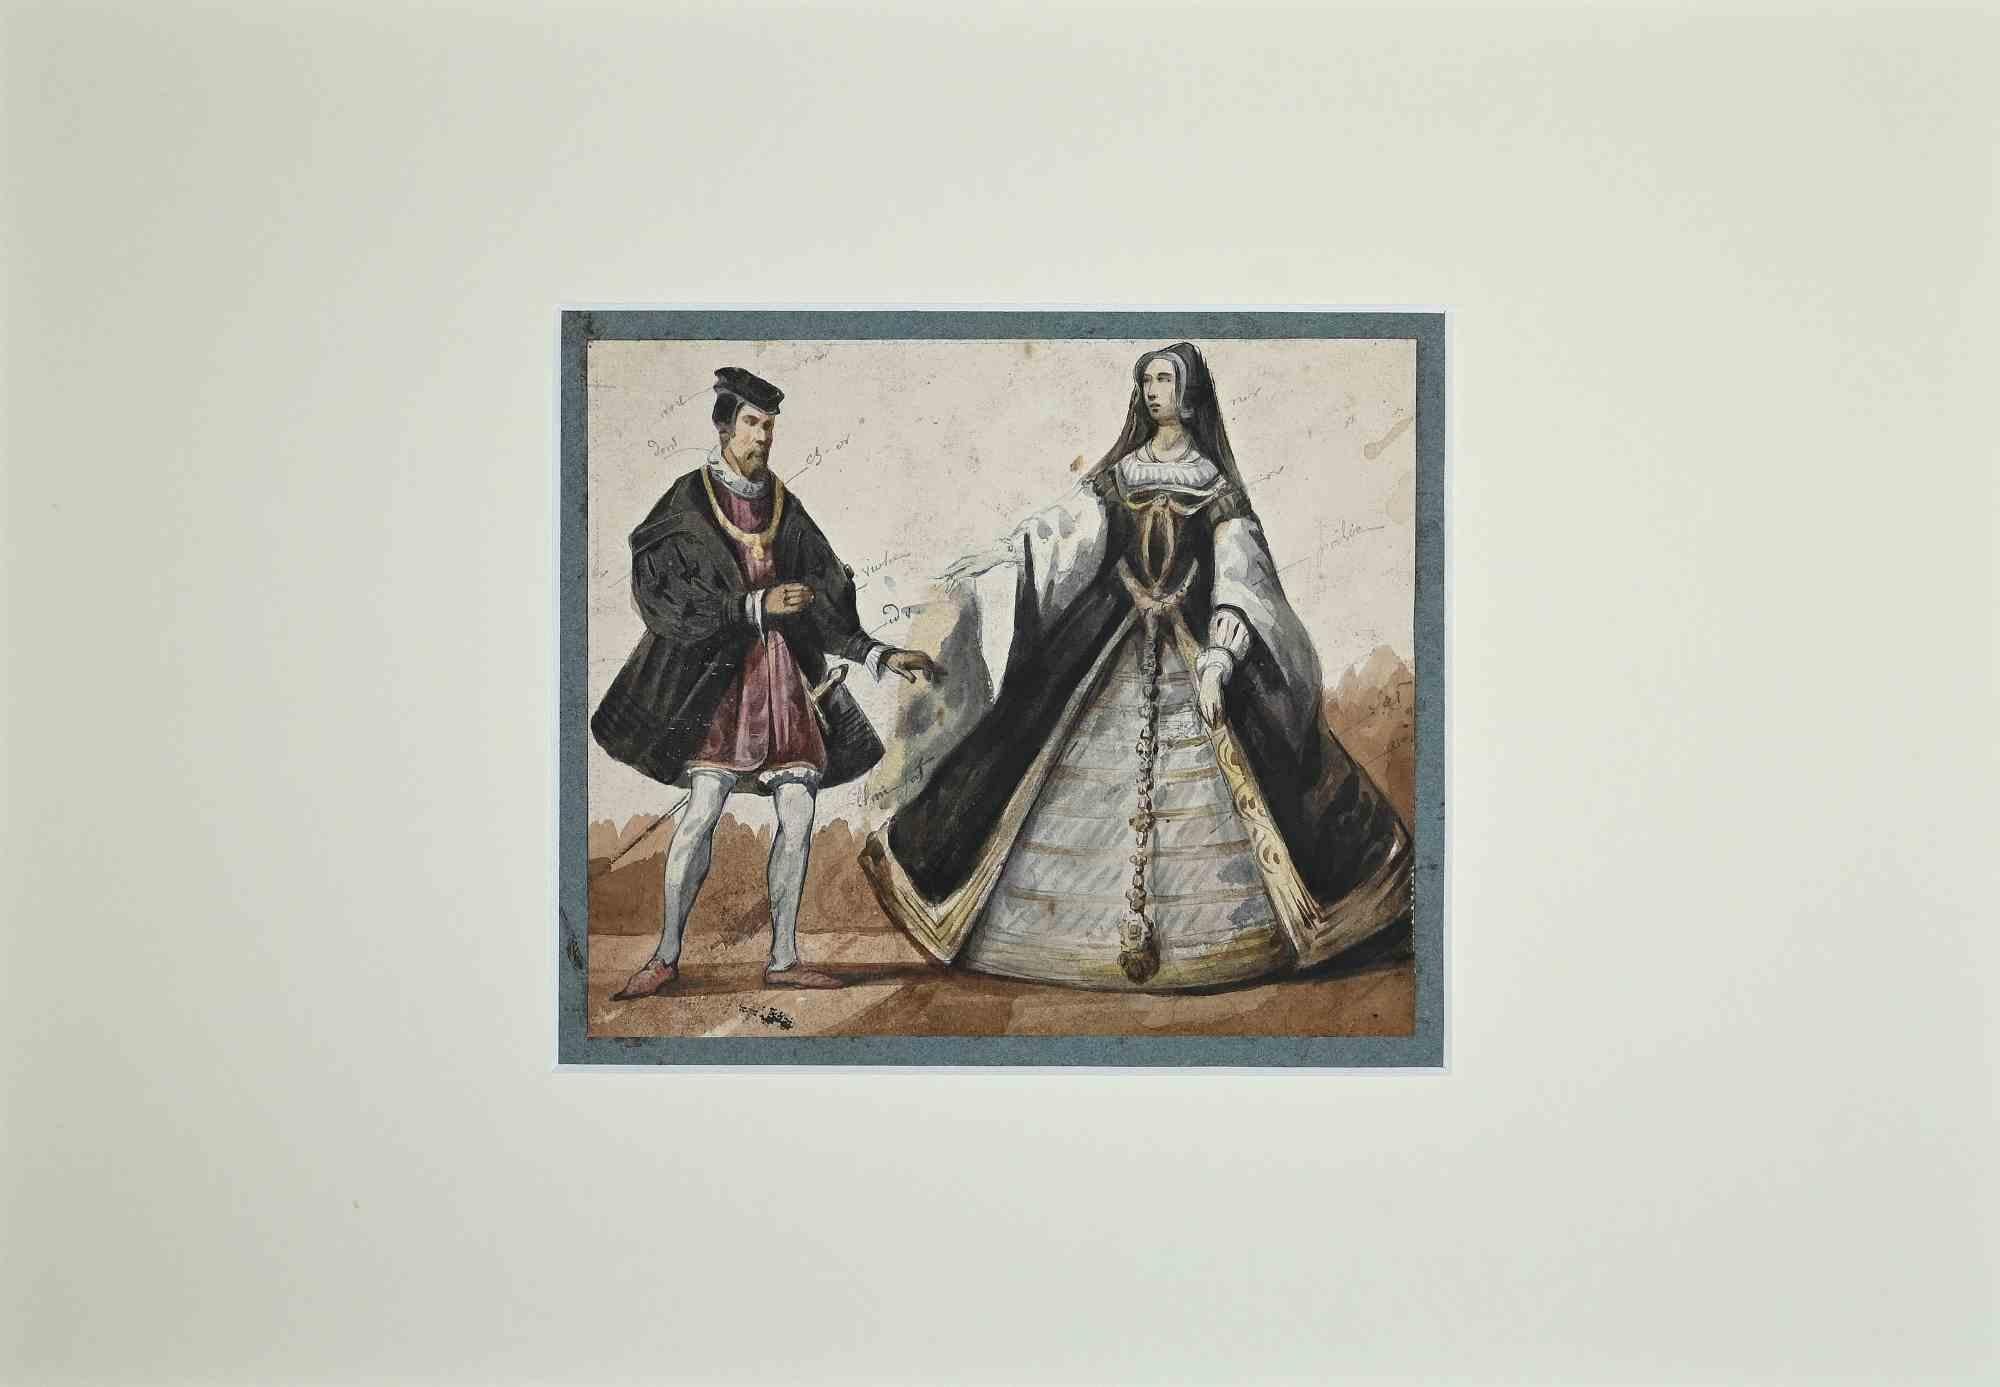 Unknown Figurative Art - Theatrical Costume - Drawing - 1860s